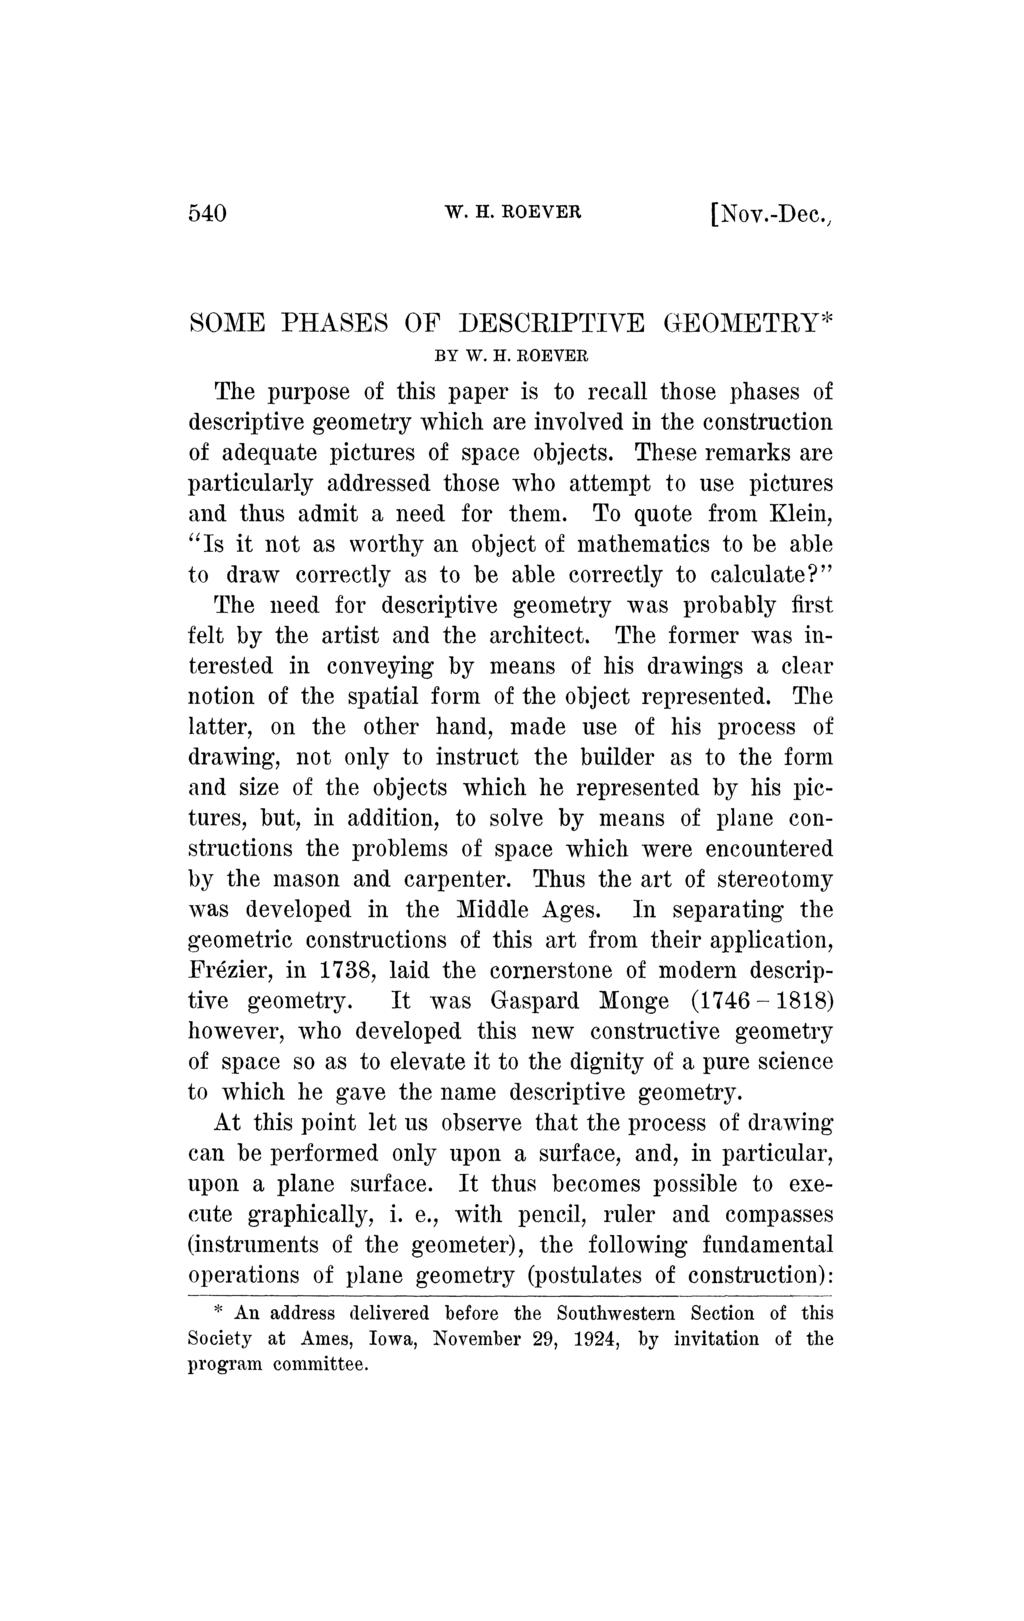 540 w. H. ROEVER [Nov.-Dec, SOME PHASES OF DESCRIPTIVE BY W. H. ROEVER GEOMETRY* The purpose of this paper is to recall those phases of descriptive geometry which are involved in the construction of adequate pictures of space objects.